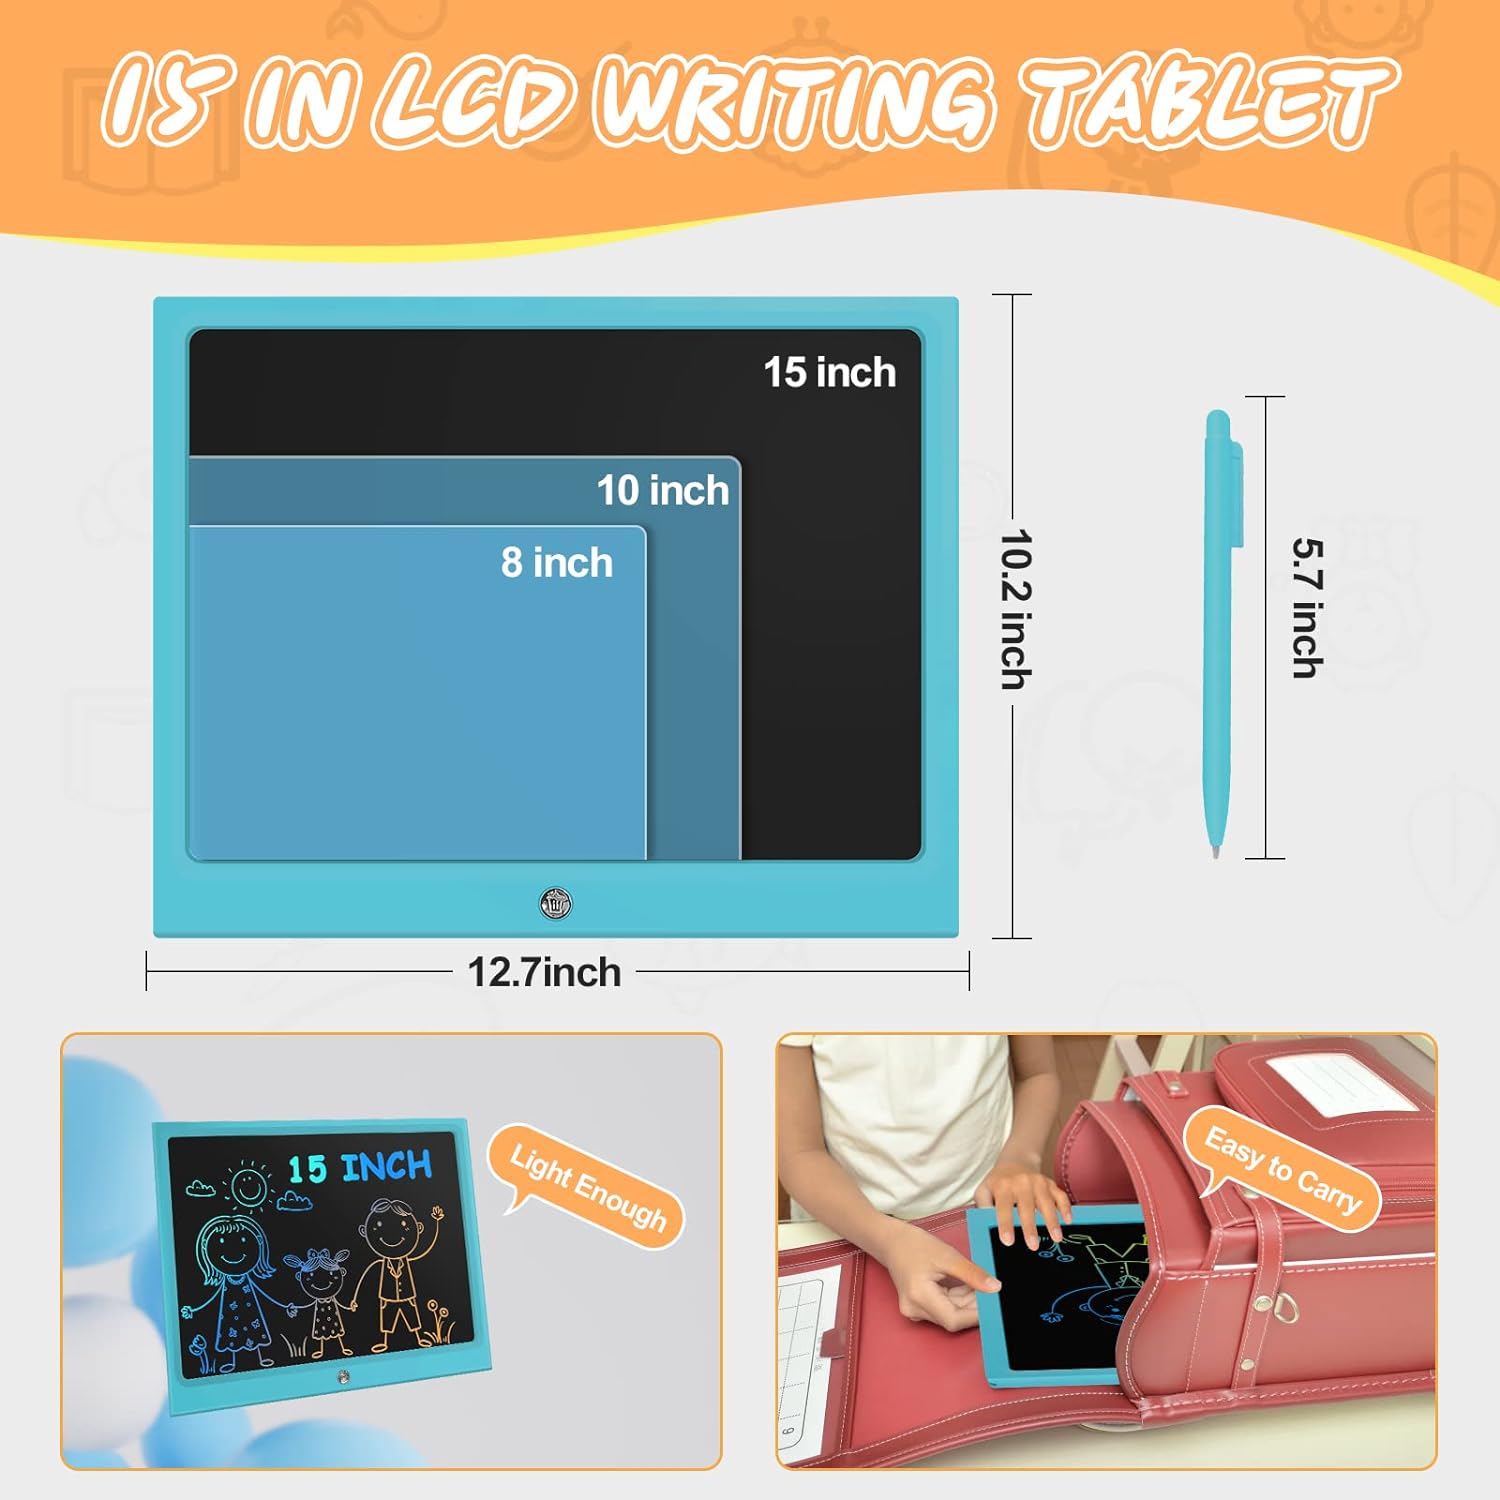 LCD Writing Tablet for Kids 15 Inch: The Perfect Educational Toy for Creative Fun